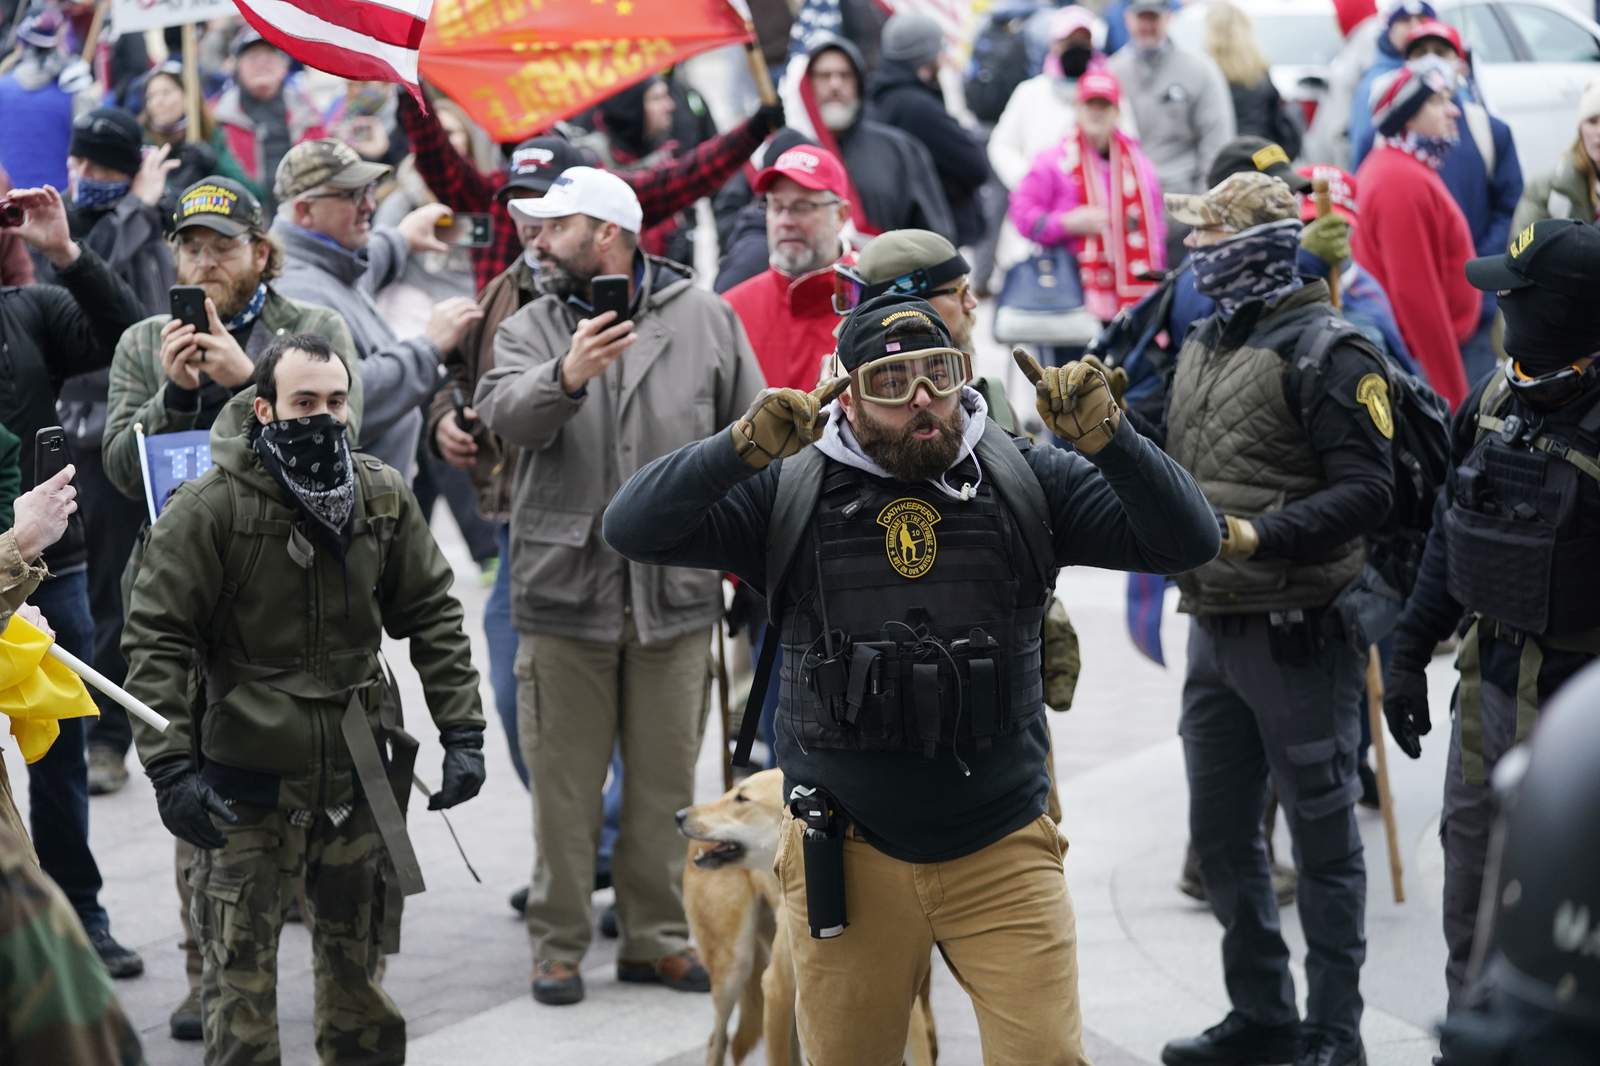 Mix of extremists who stormed Capitol isn't retreating